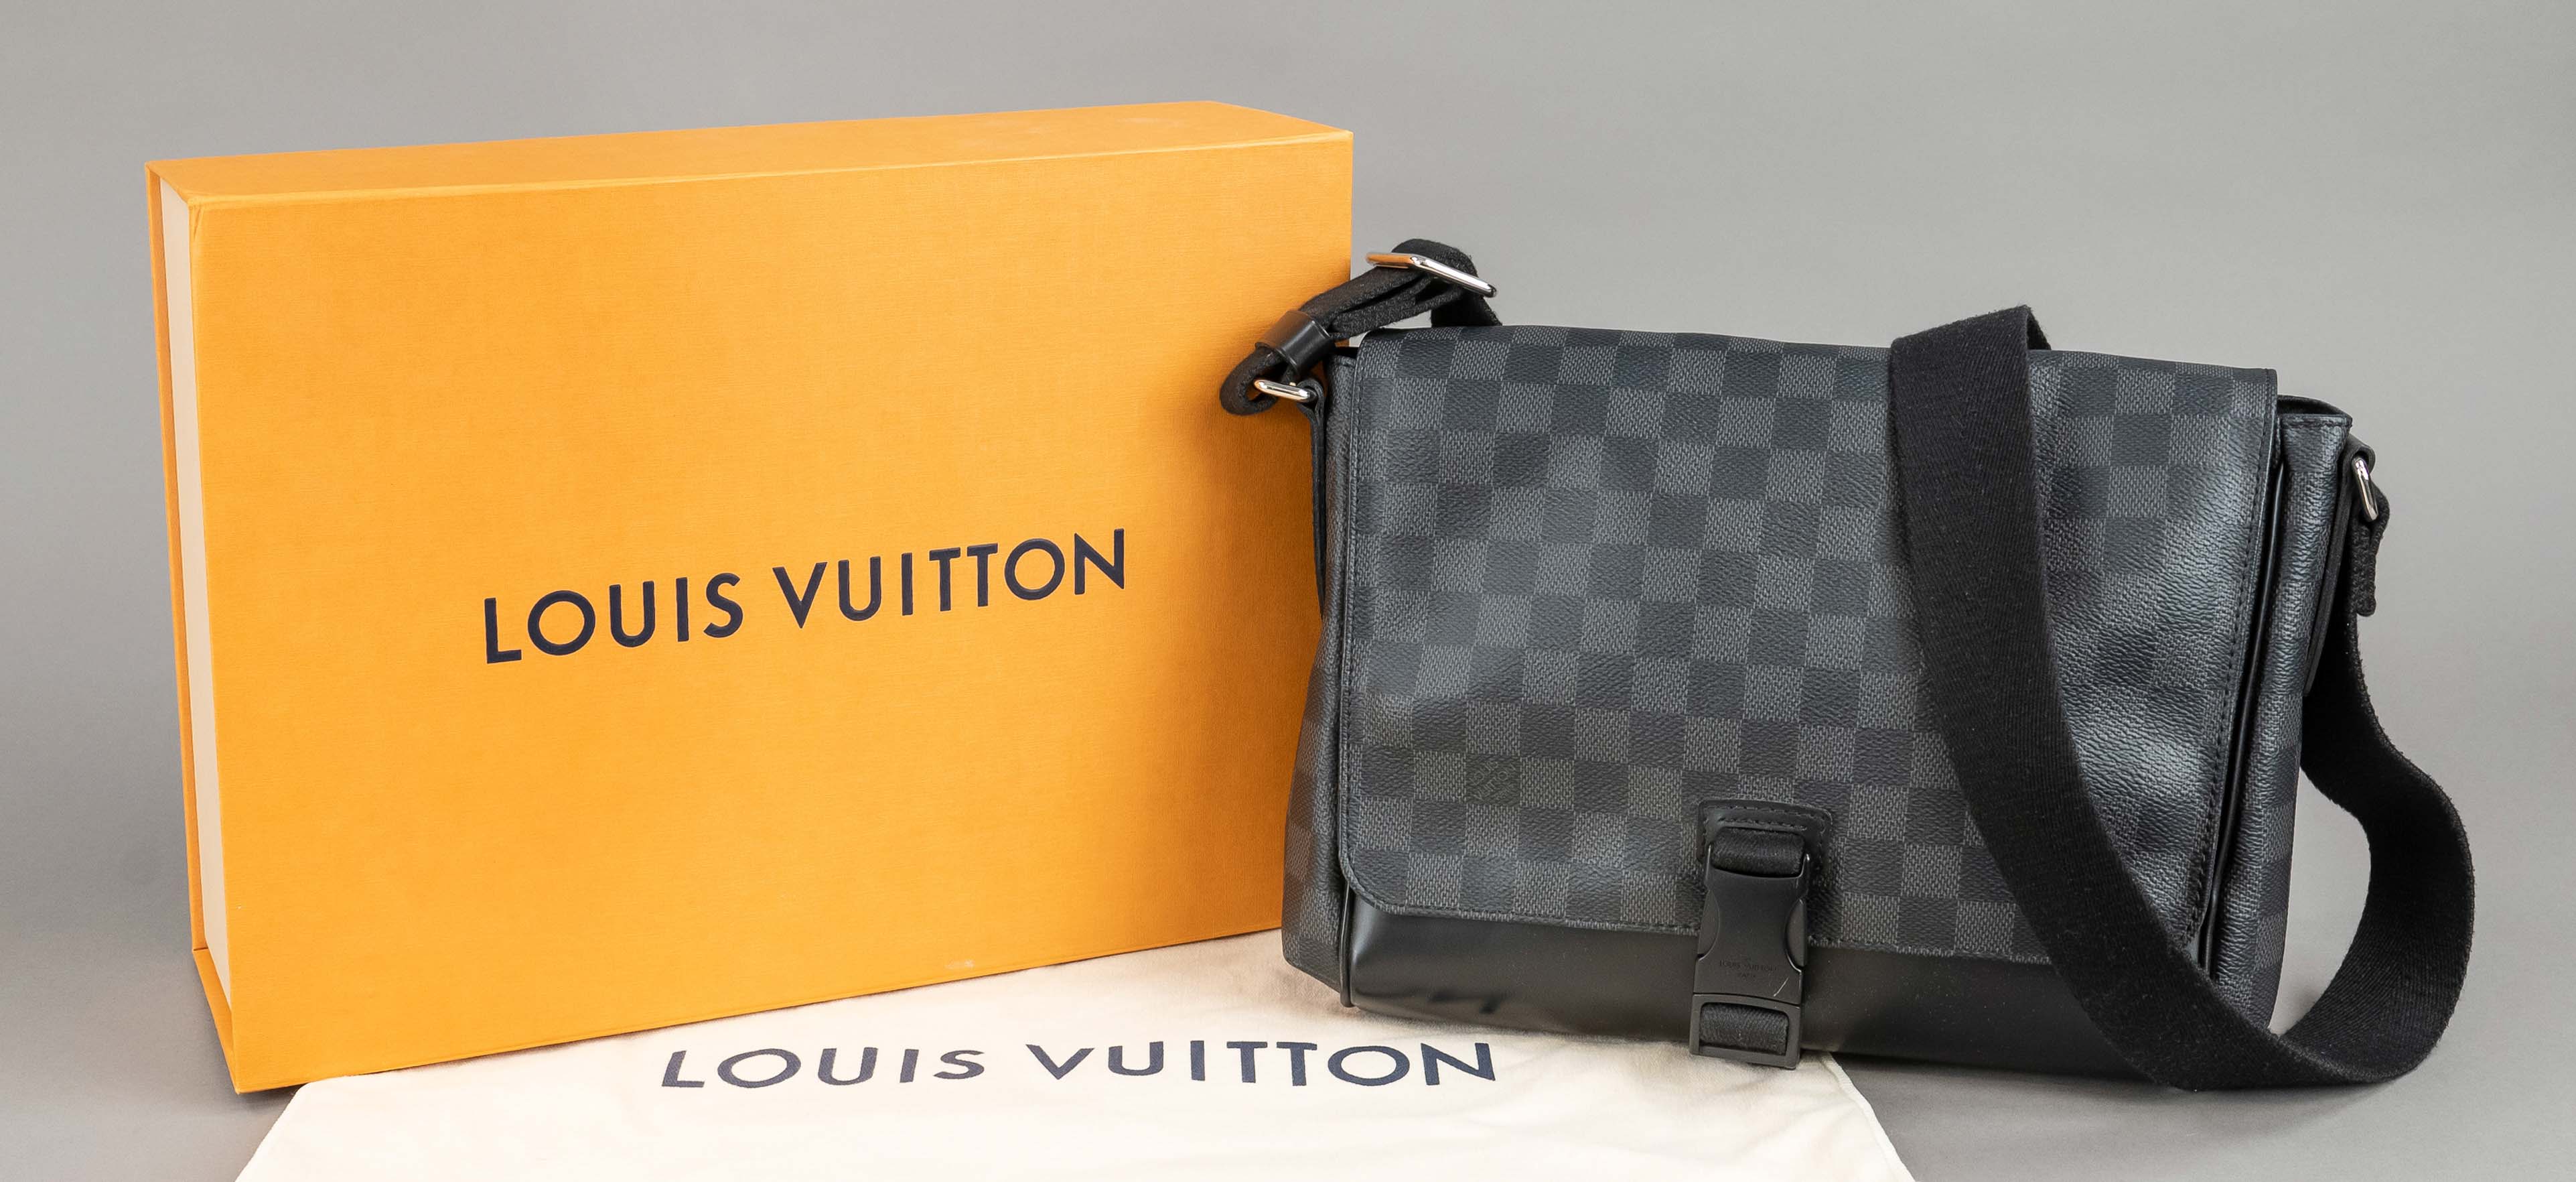 Louis Vuitton, Damier Graphite Canvas Messenger/Business Bag, gray and black checkered rubberized